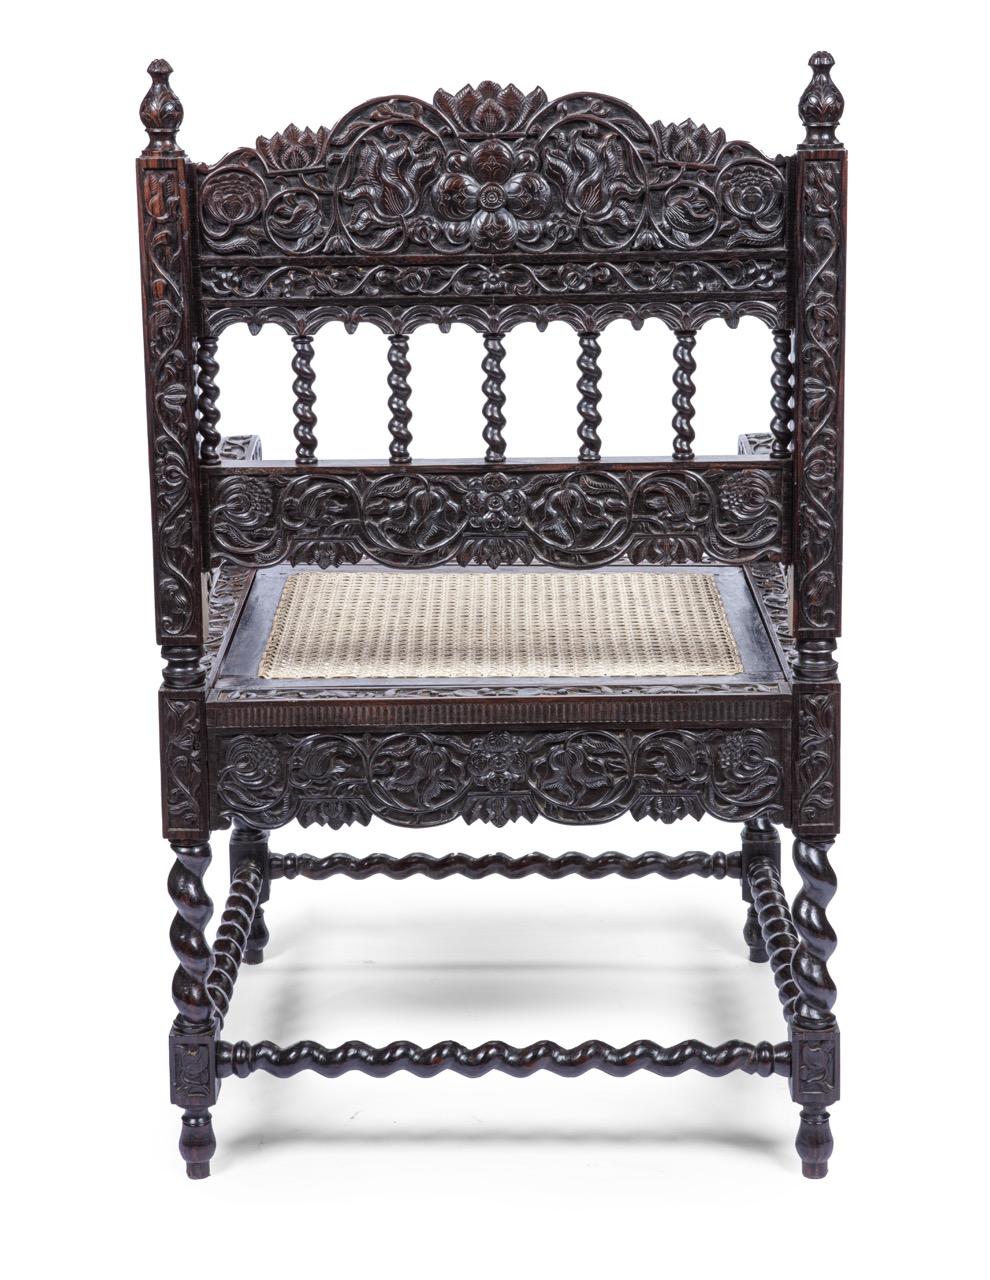 A Dutch-colonial Macassar ebony (Diospyros celebica) armchair

Batavia (Jakarta), circa 1680

H. 89.5 x W. 54.5 x D. 58 cm

The bold carvings of flowers are decorated on all sides, type VI according to Jan Veenendaal’s classification in Wonen